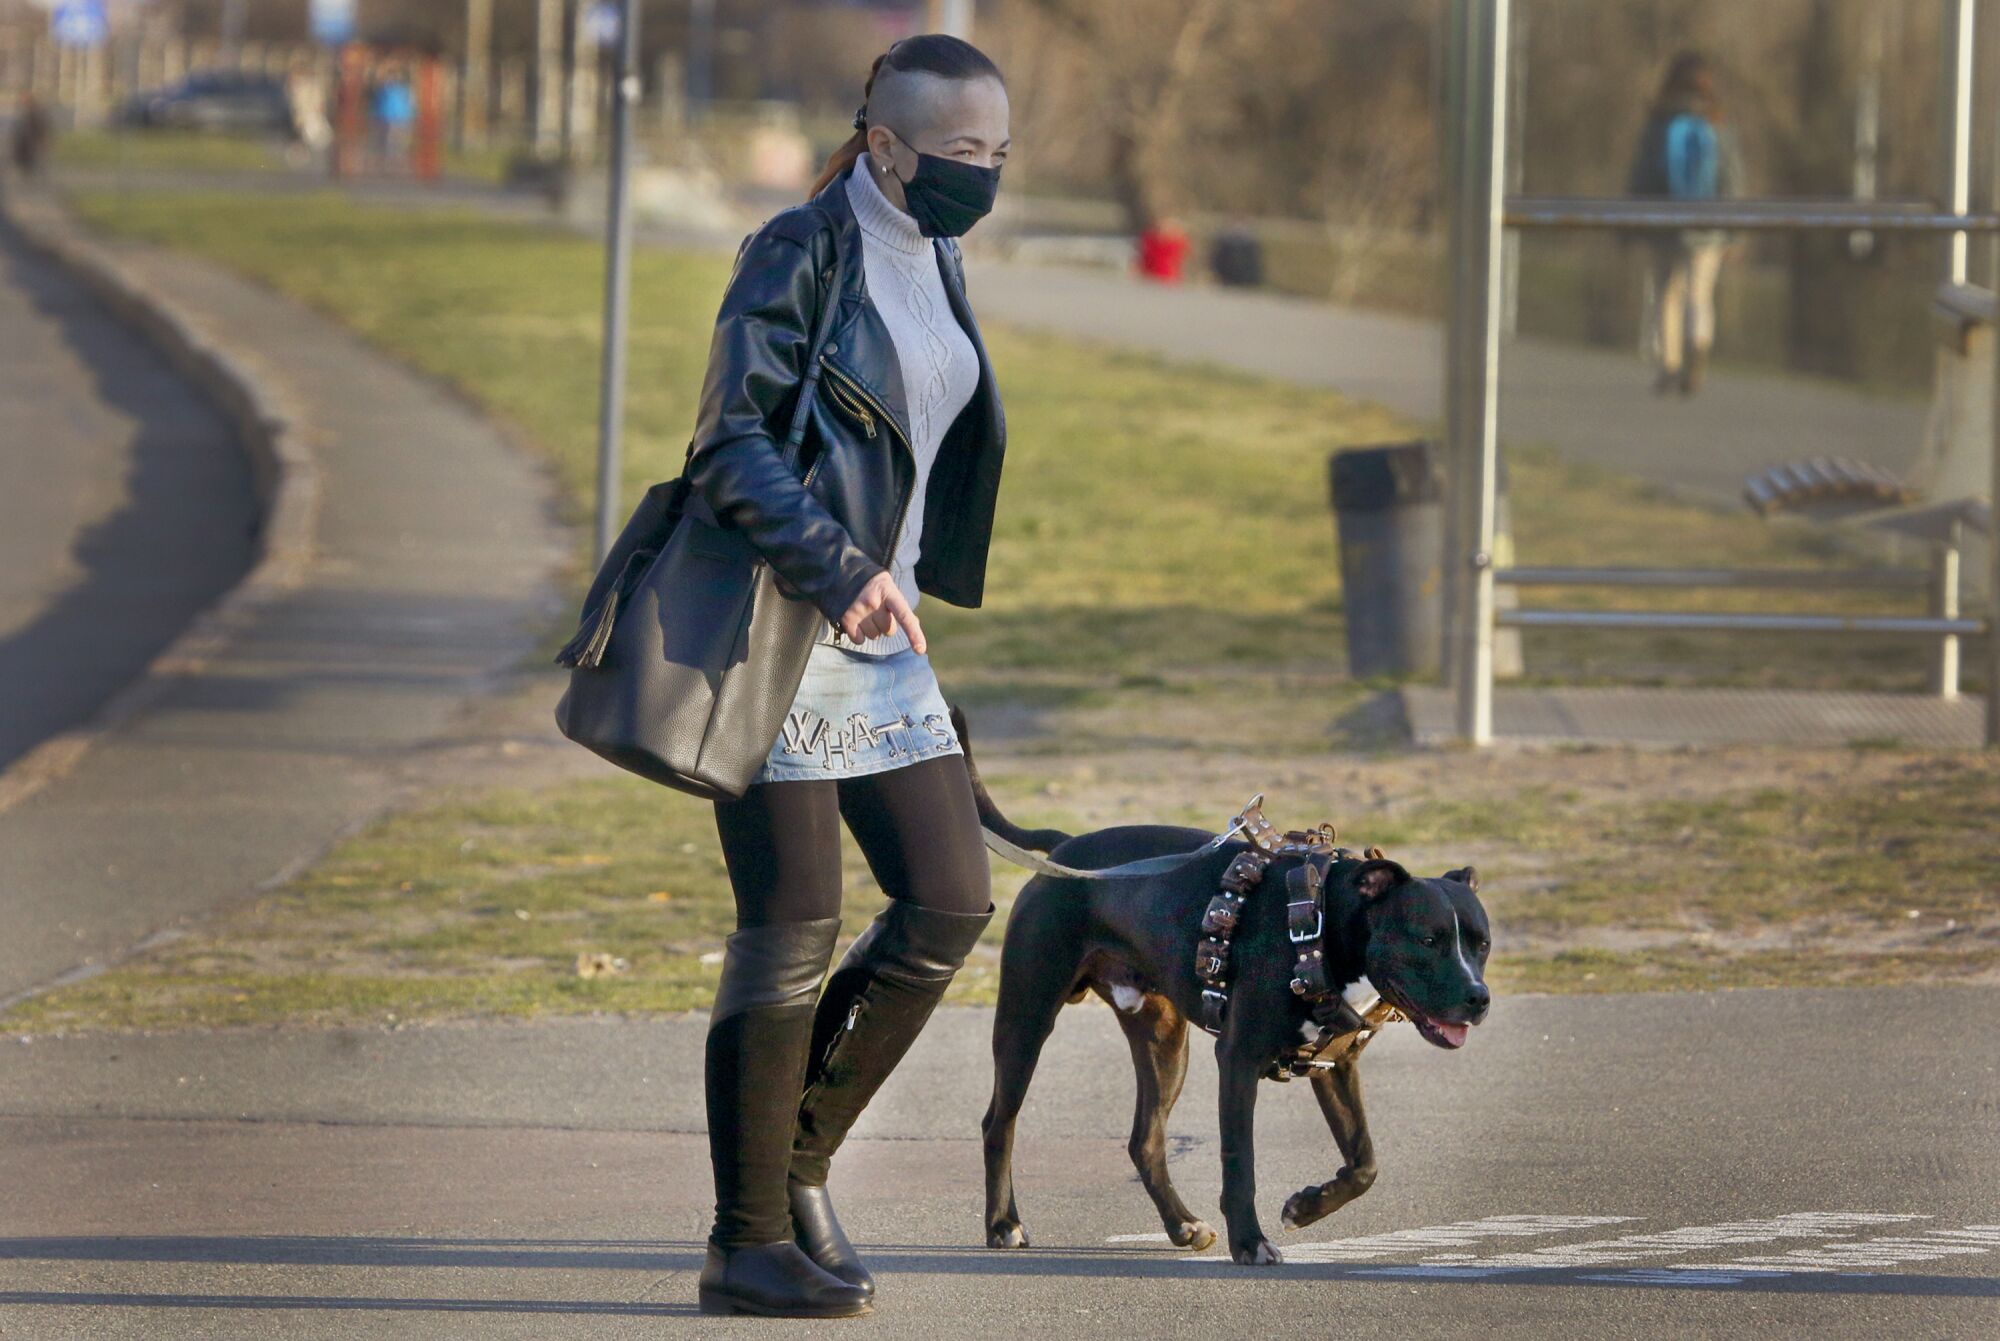 UKRAINE: A woman in a face mask to prevent the coronavirus spread walks a dog in Kyiv, Ukraine, on April 6.